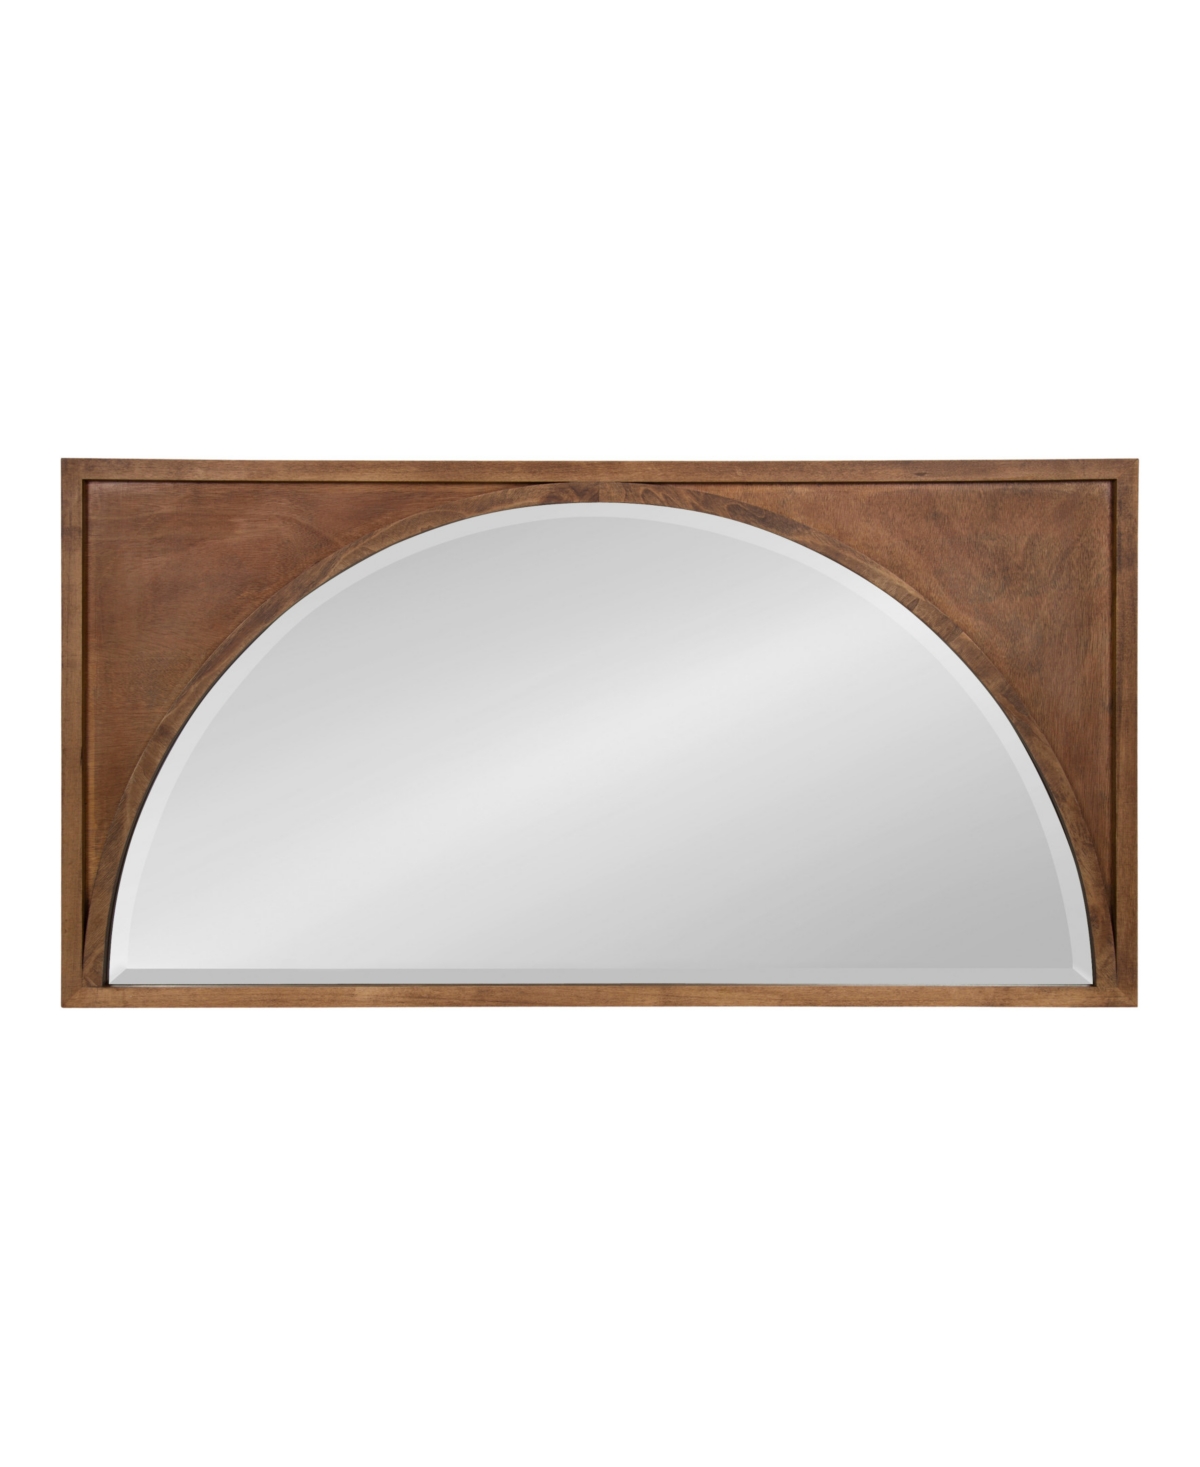 andover Wooden Wall Panel Arch Mirror - Brown